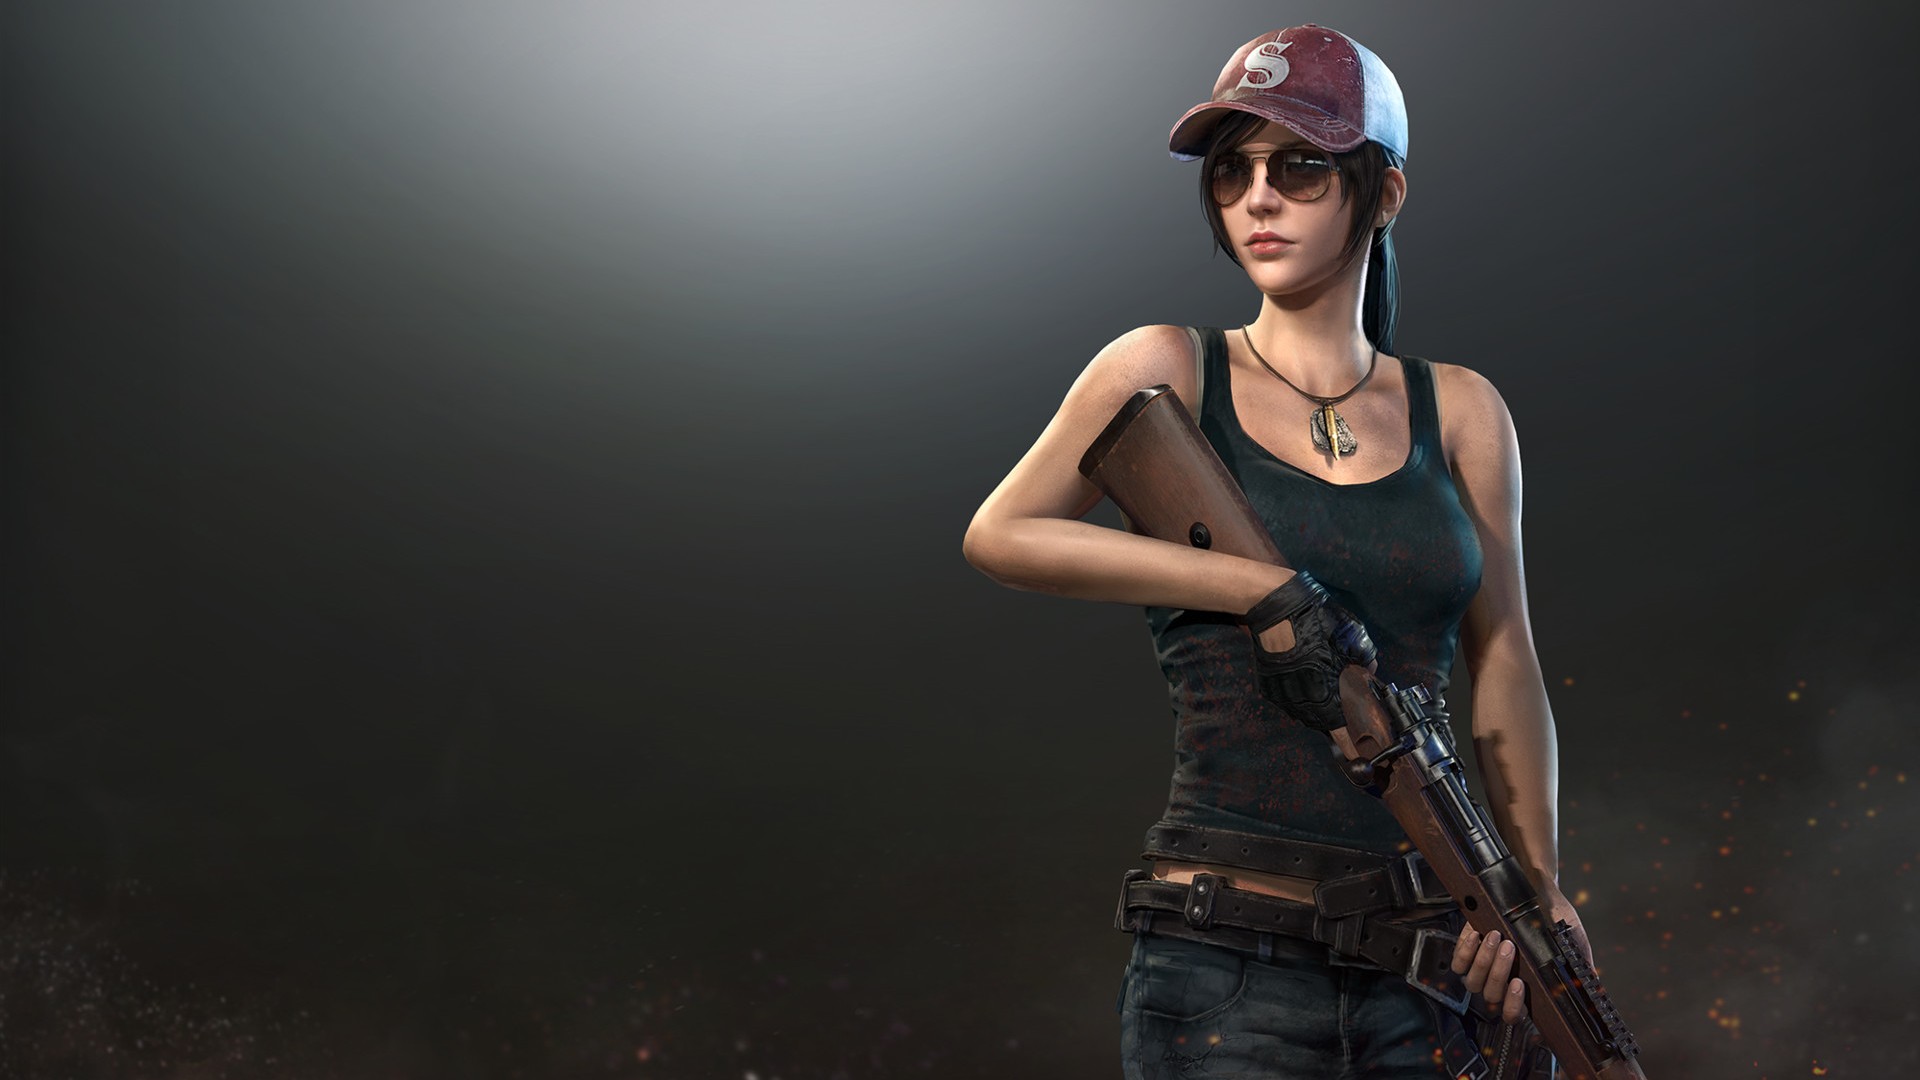 PUBG iOS Wallpaper with image resolution 1920x1080 pixel. You can use this wallpaper as background for your desktop Computer Screensavers, Android or iPhone smartphones